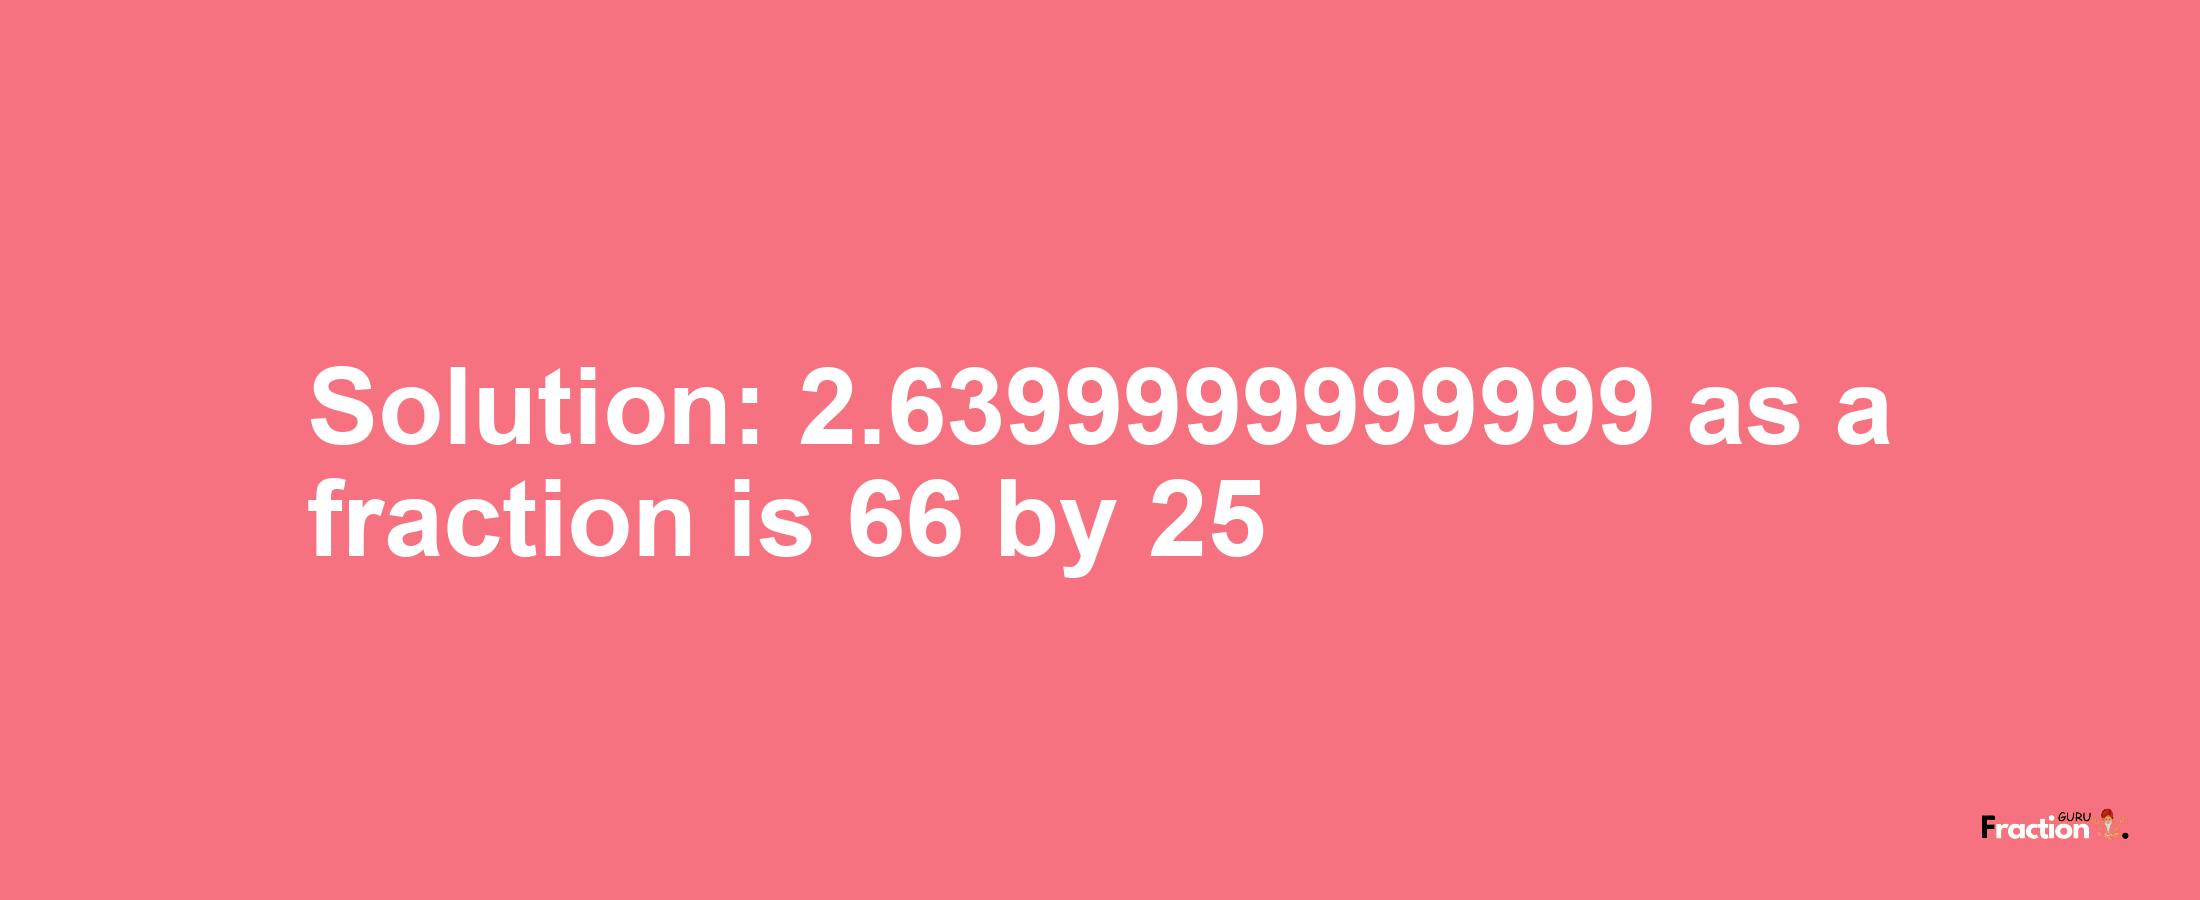 Solution:2.6399999999999 as a fraction is 66/25